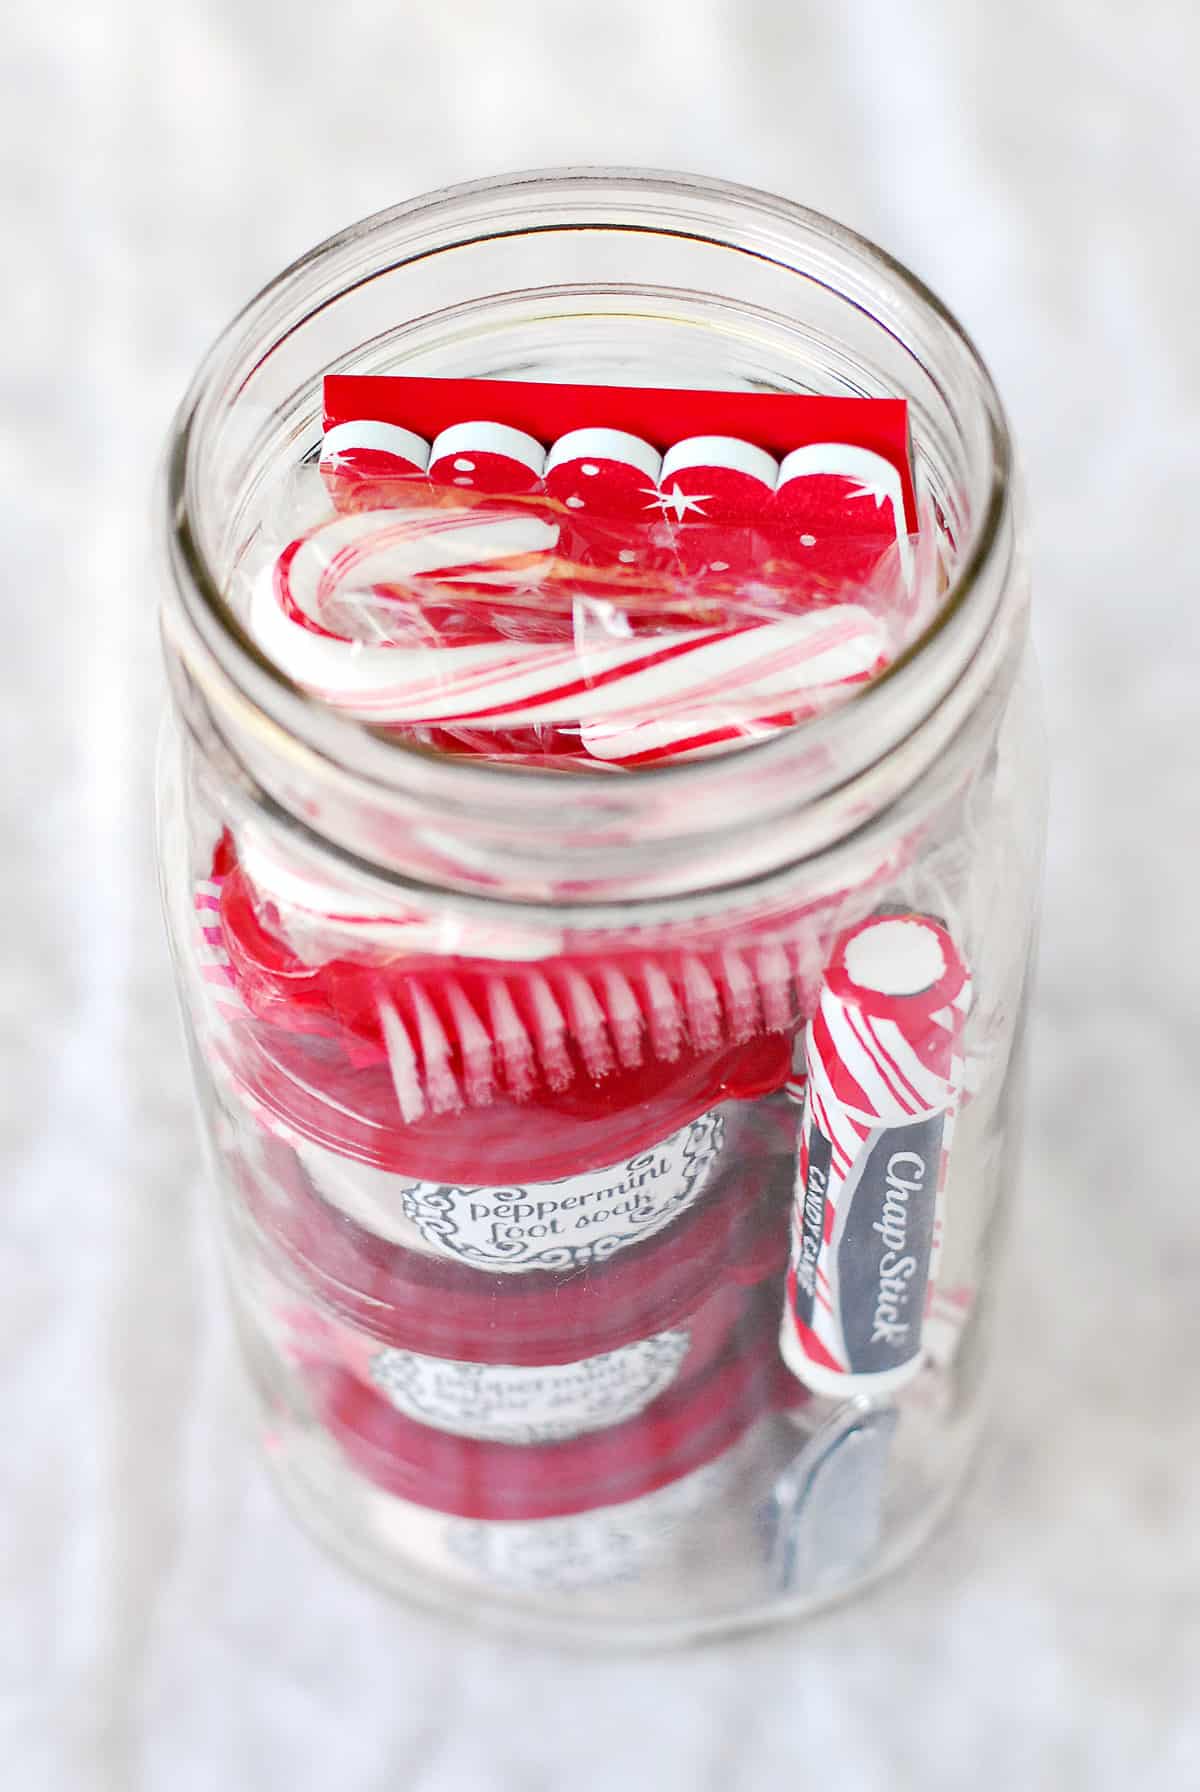 Add a candy cane to the top.